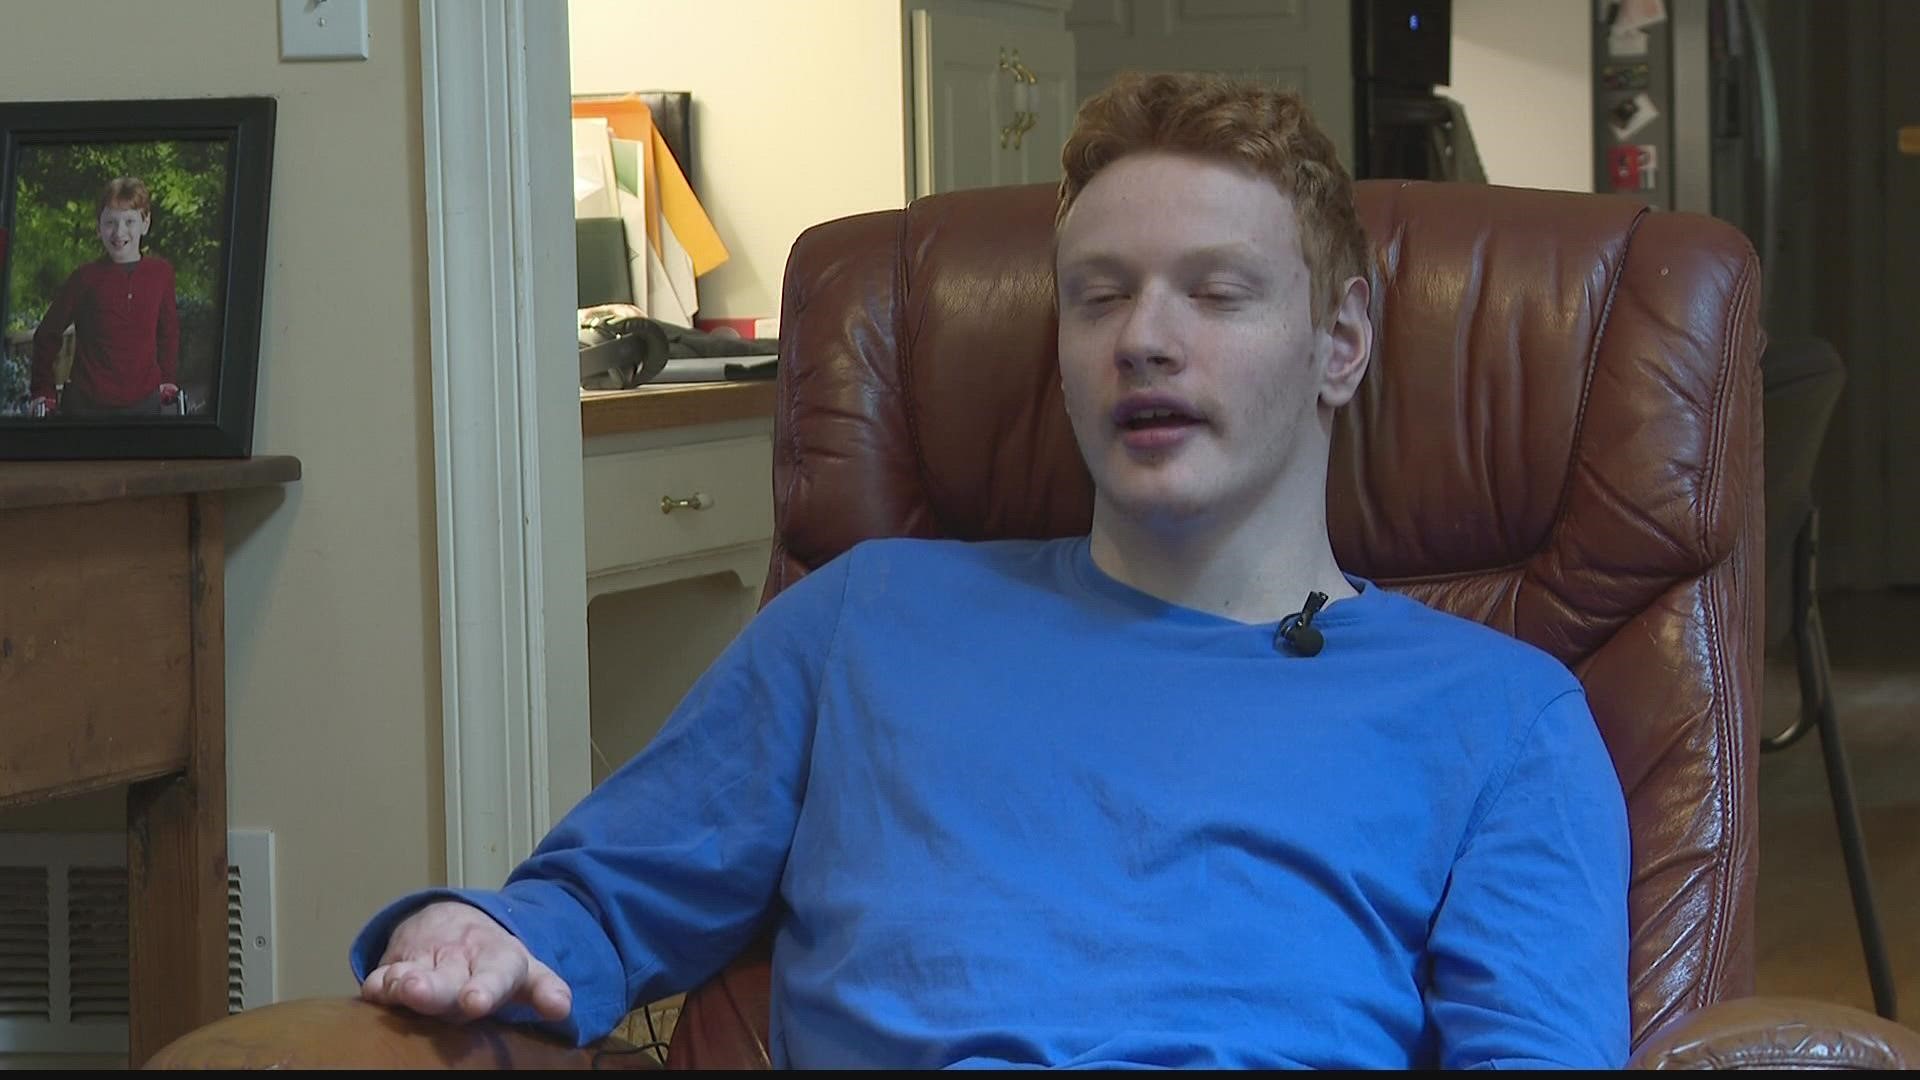 Jake Branan plans to use the funds for a 24-hour personal care aid.